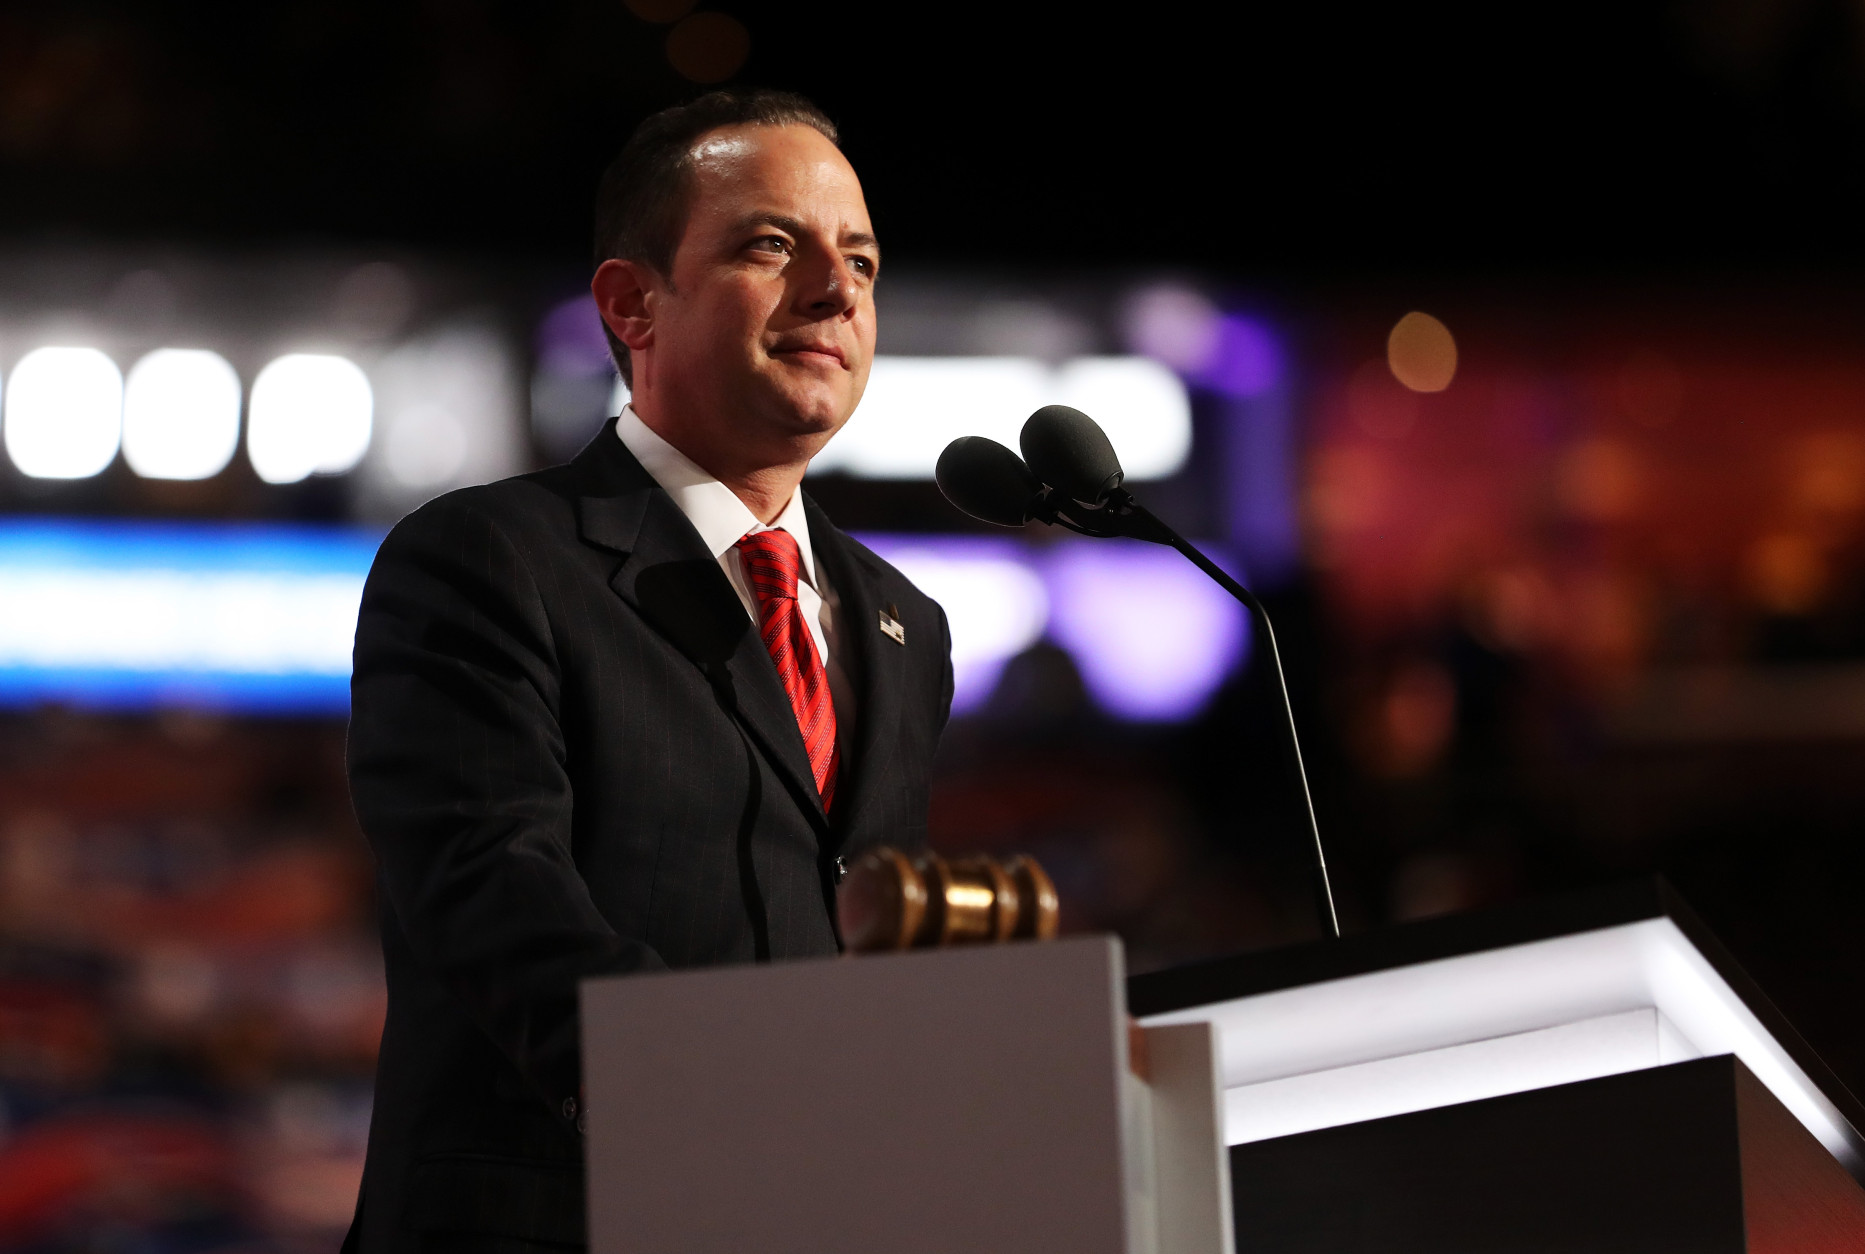 CLEVELAND, OH - JULY 20: Reince Priebus, chairman of the Republican National Committee, concludes the third day of the Republican National Convention on July 20, 2016 at the Quicken Loans Arena in Cleveland, Ohio. Republican presidential candidate Donald Trump received the number of votes needed to secure the party's nomination. An estimated 50,000 people are expected in Cleveland, including hundreds of protesters and members of the media. The four-day Republican National Convention kicked off on July 18. (Photo by John Moore/Getty Images)